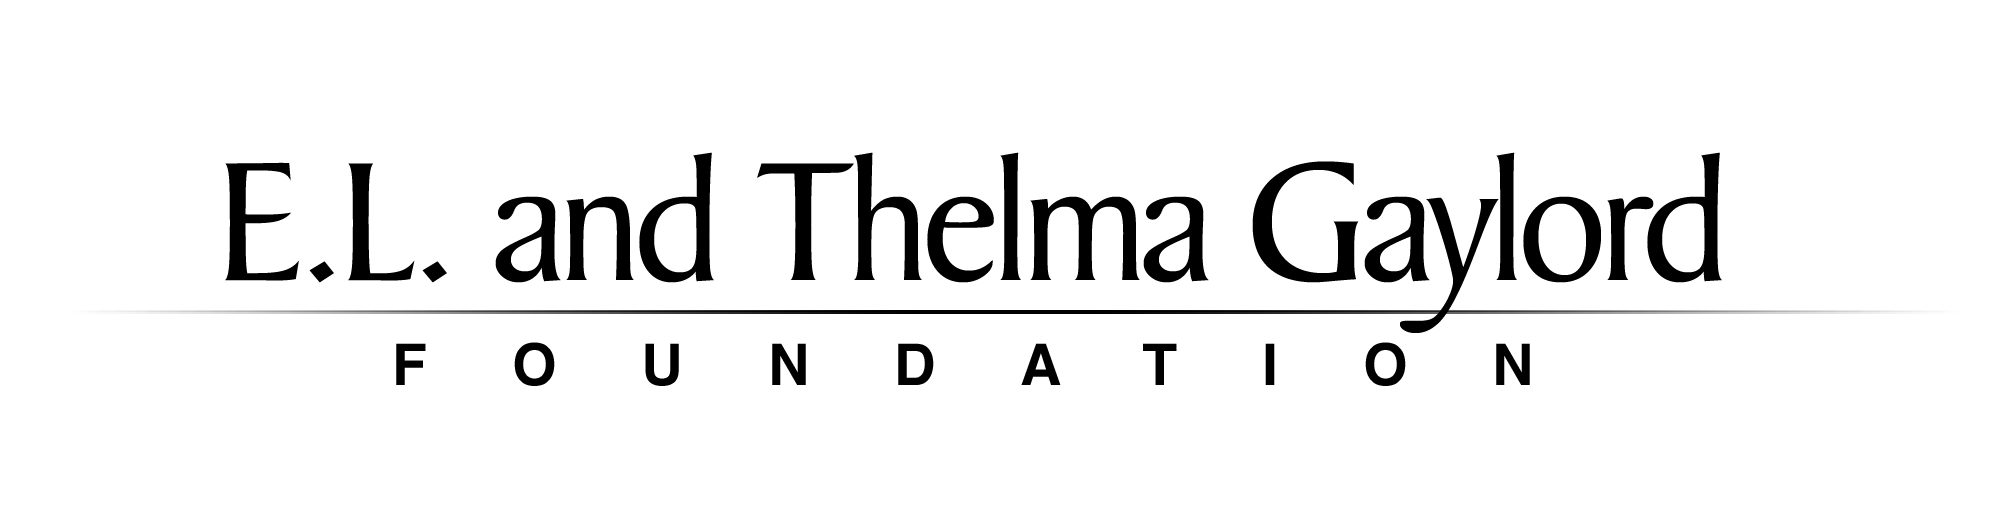 E.L and Thelma Gaylord Foundation Logo